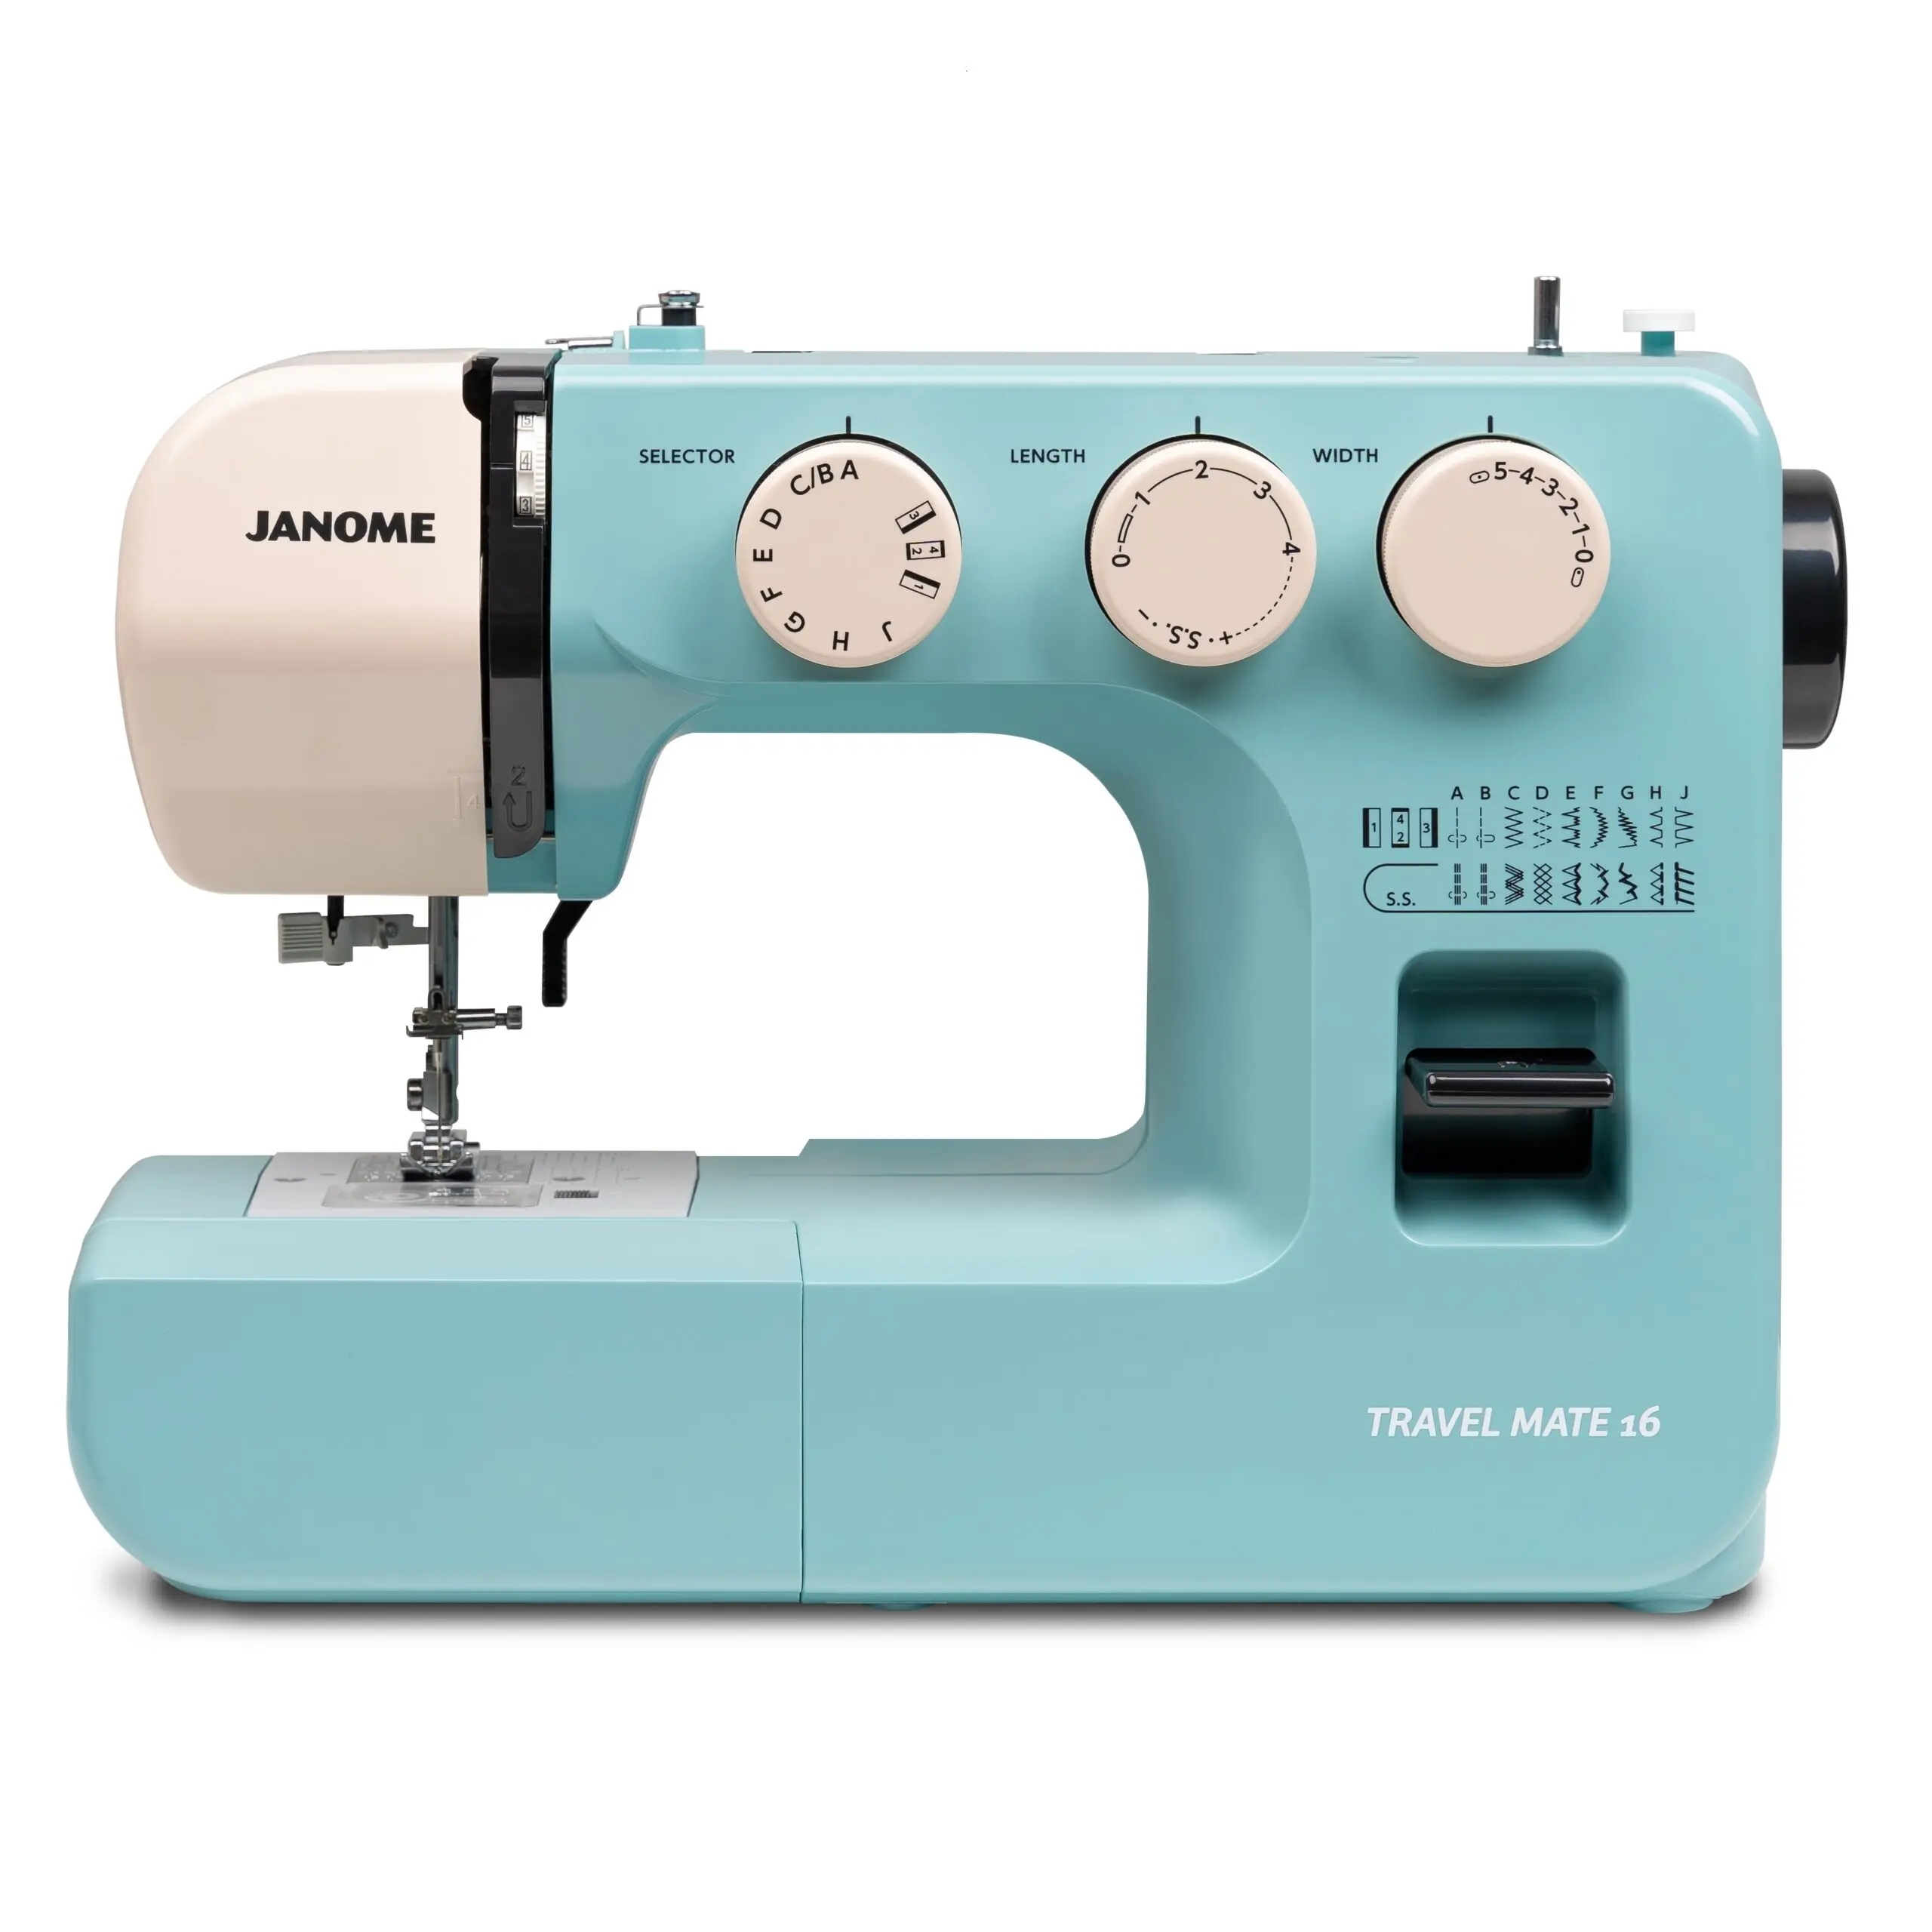 Janome Travel Mate 16 Sewing Machine for sale near me cheap